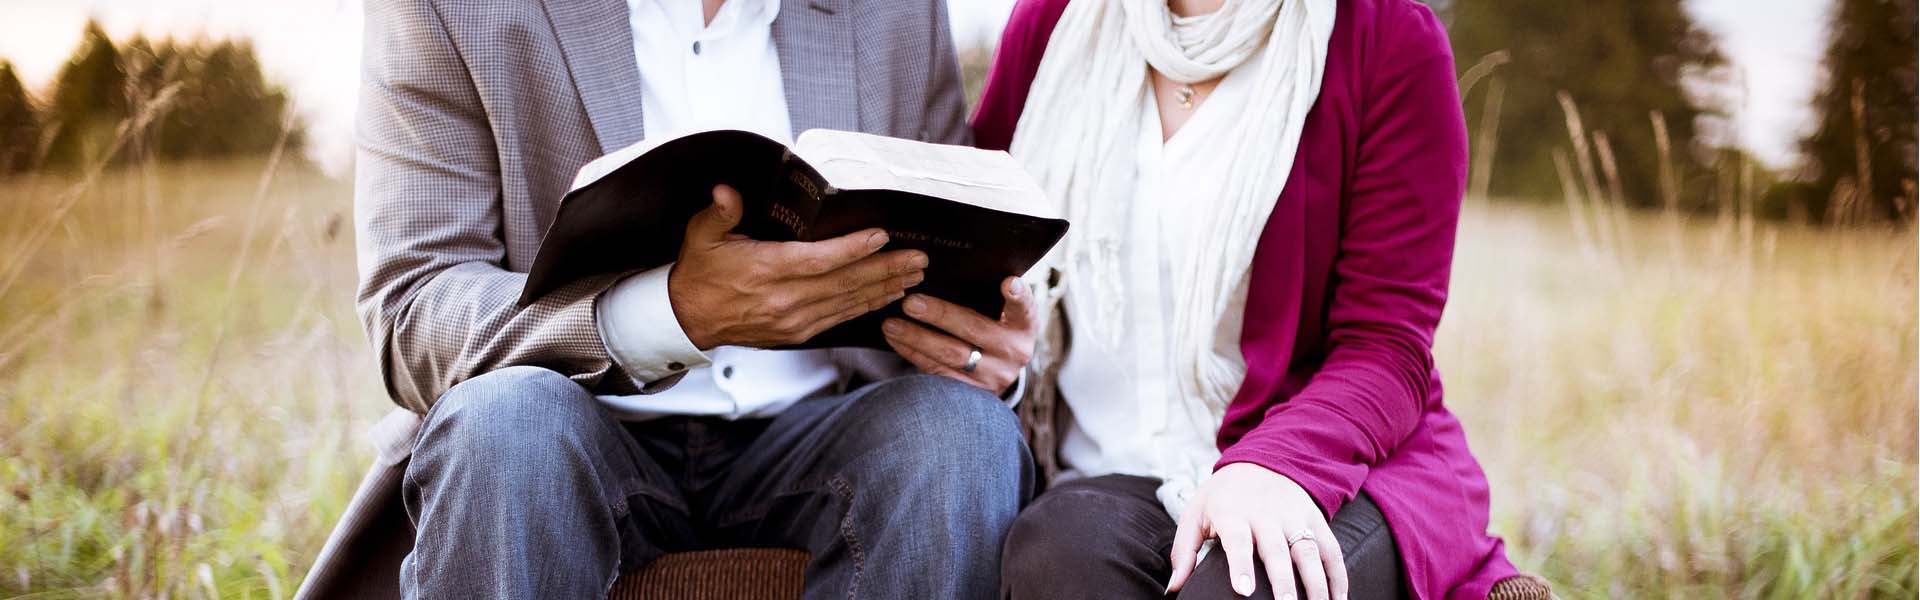 two people sitting together studying the bible.